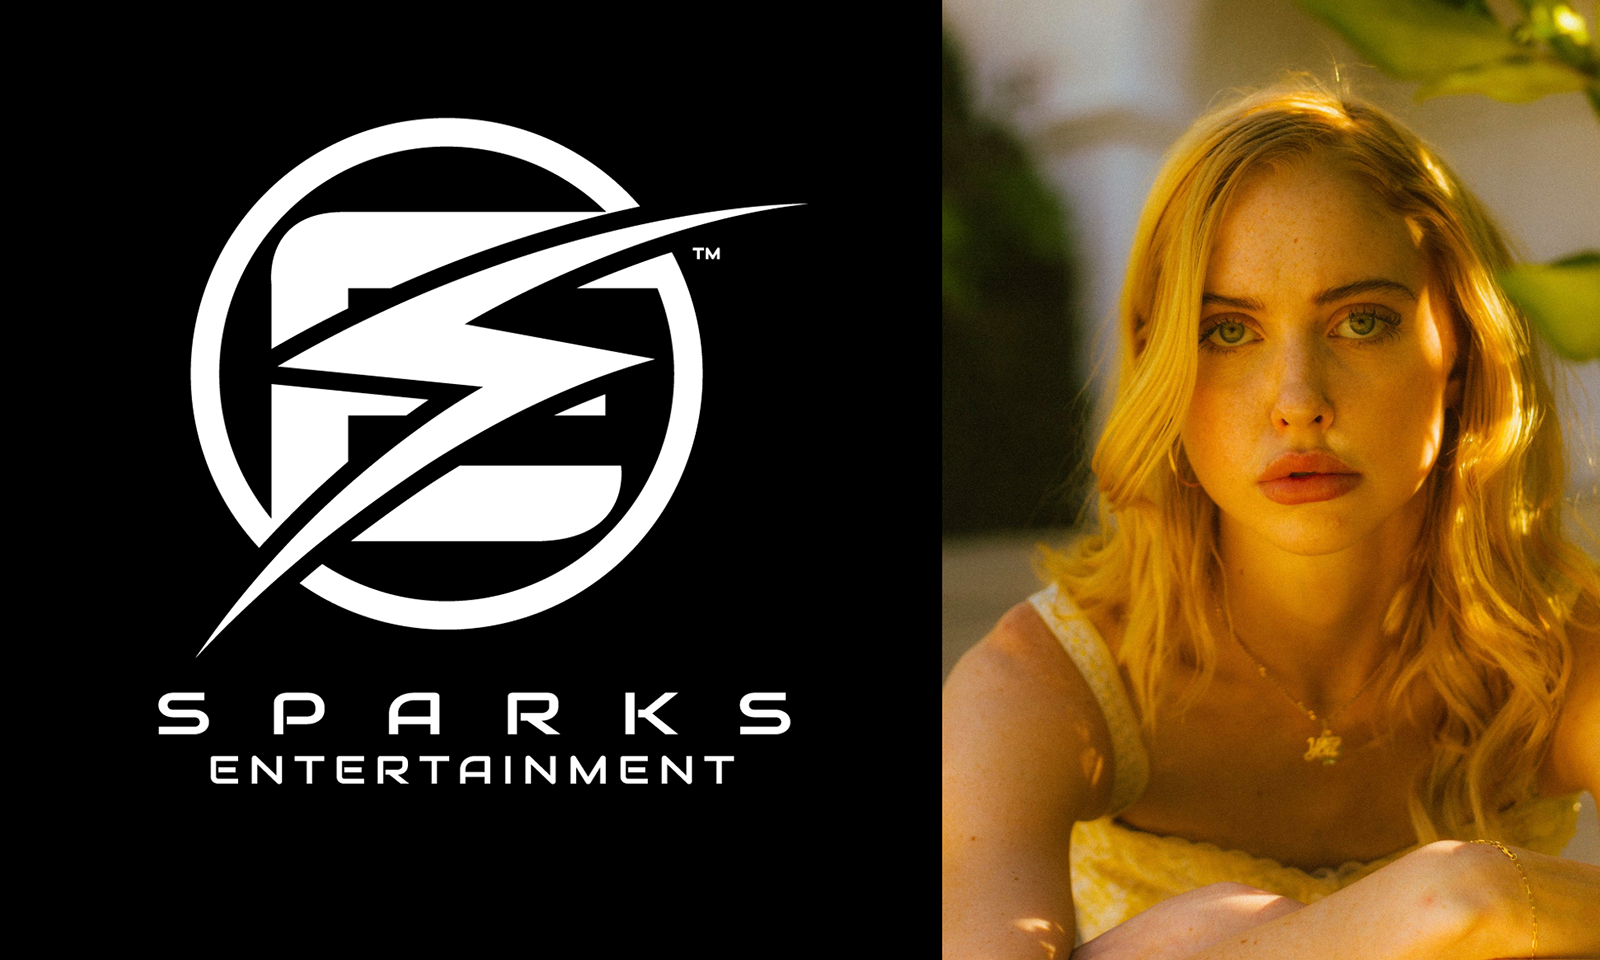 Sparks Entertainment Announces Thriller With Chloe Cherry in Lead